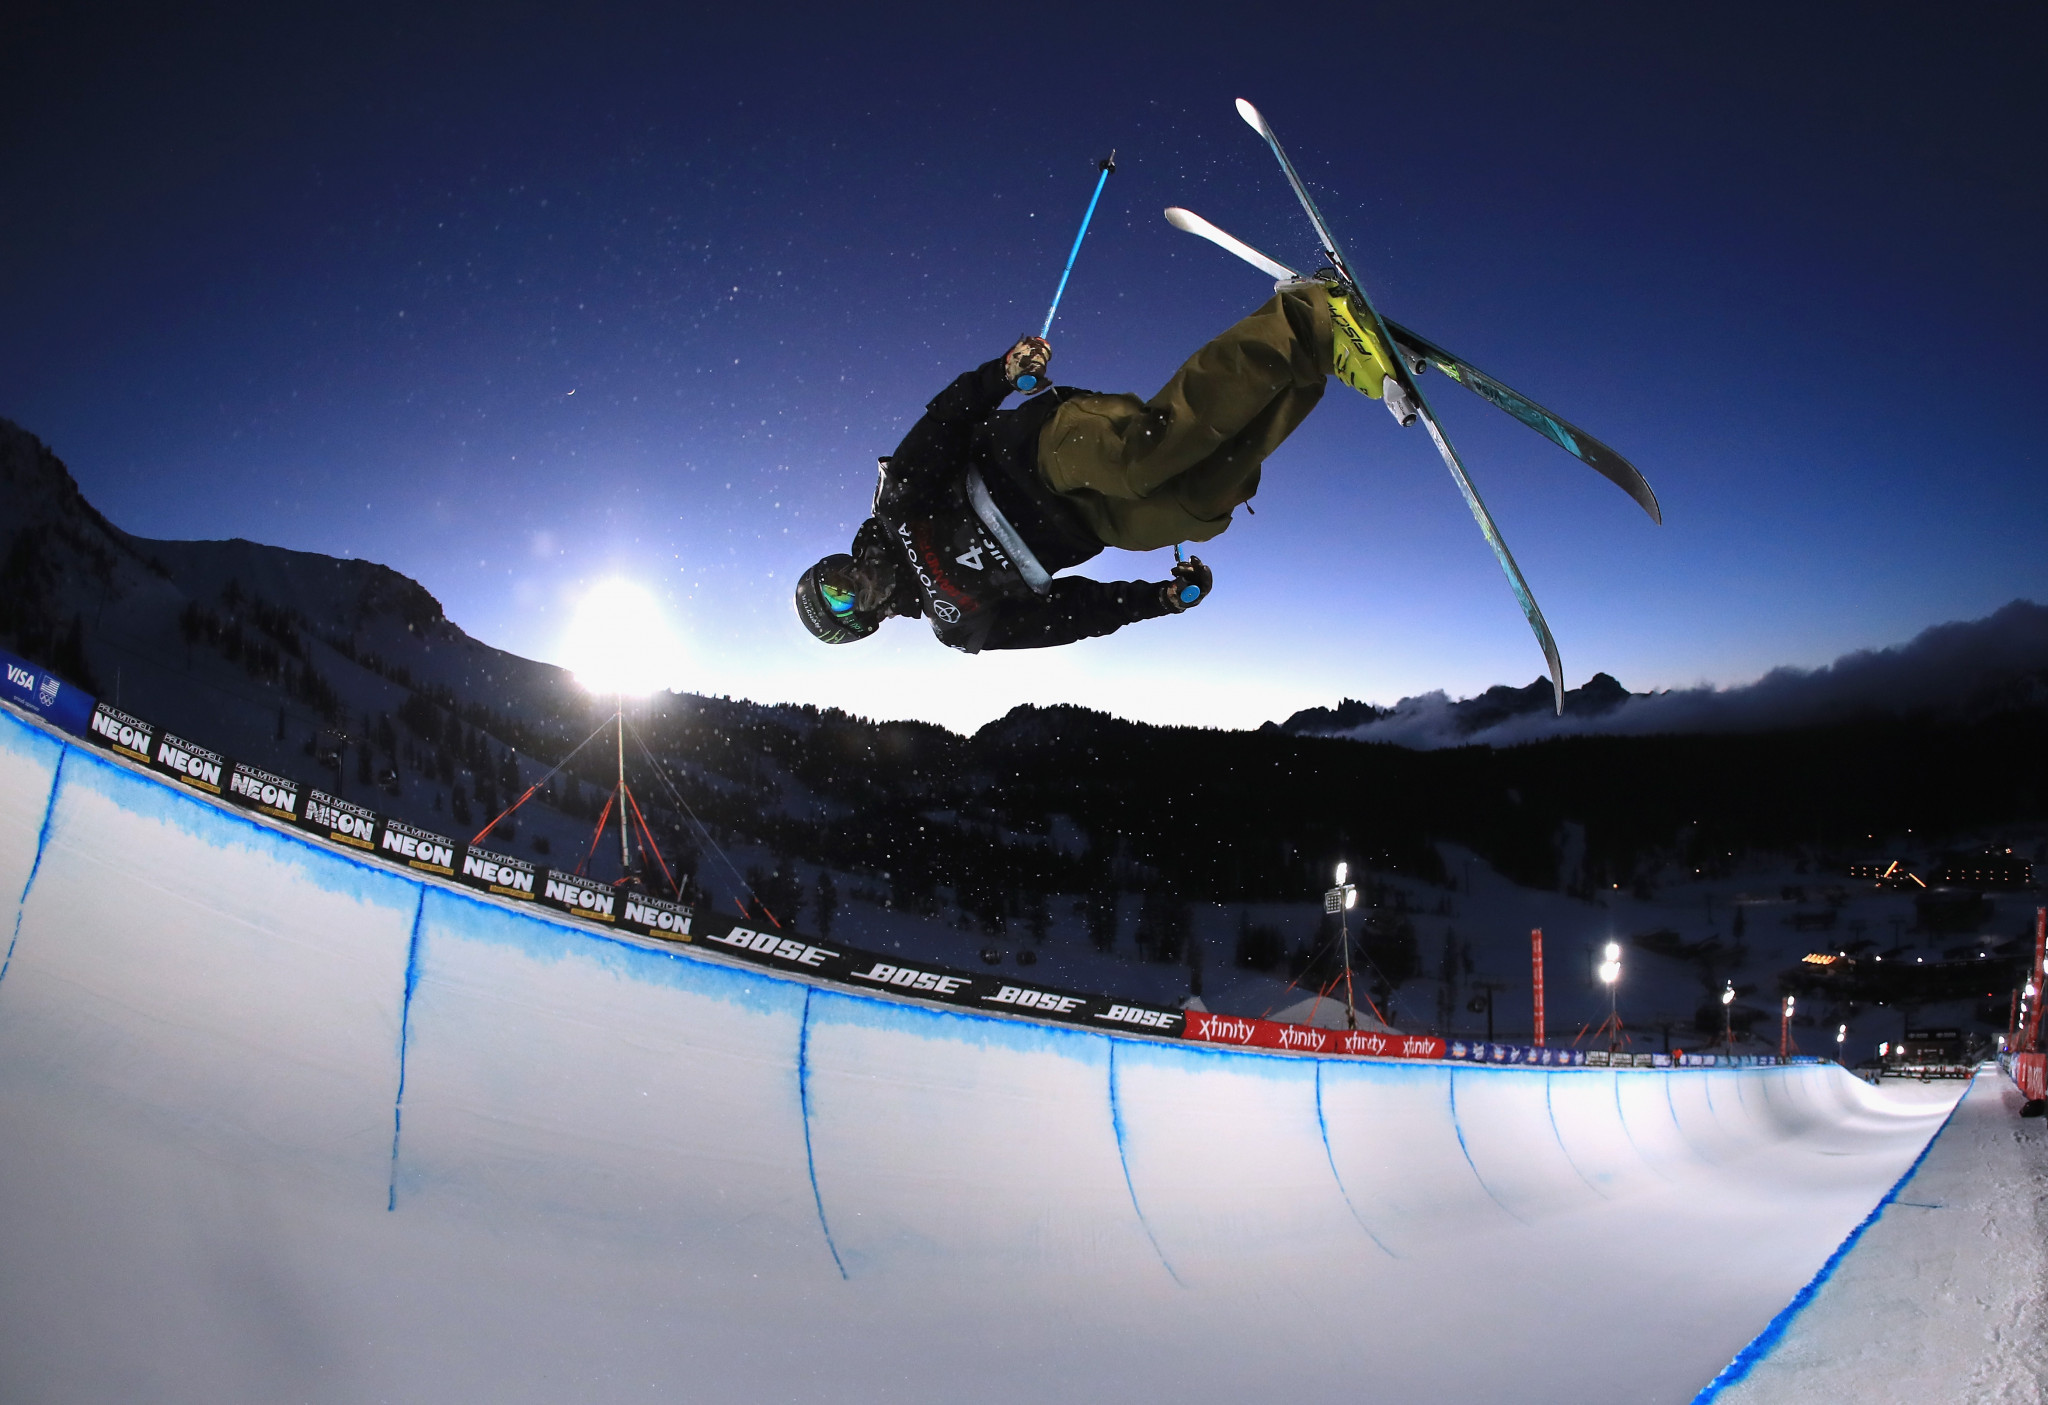 Leysin will also host the halfpipe competition during the Lausanne 2020 Winter Youth Olympic Games ©Lausanne 2020